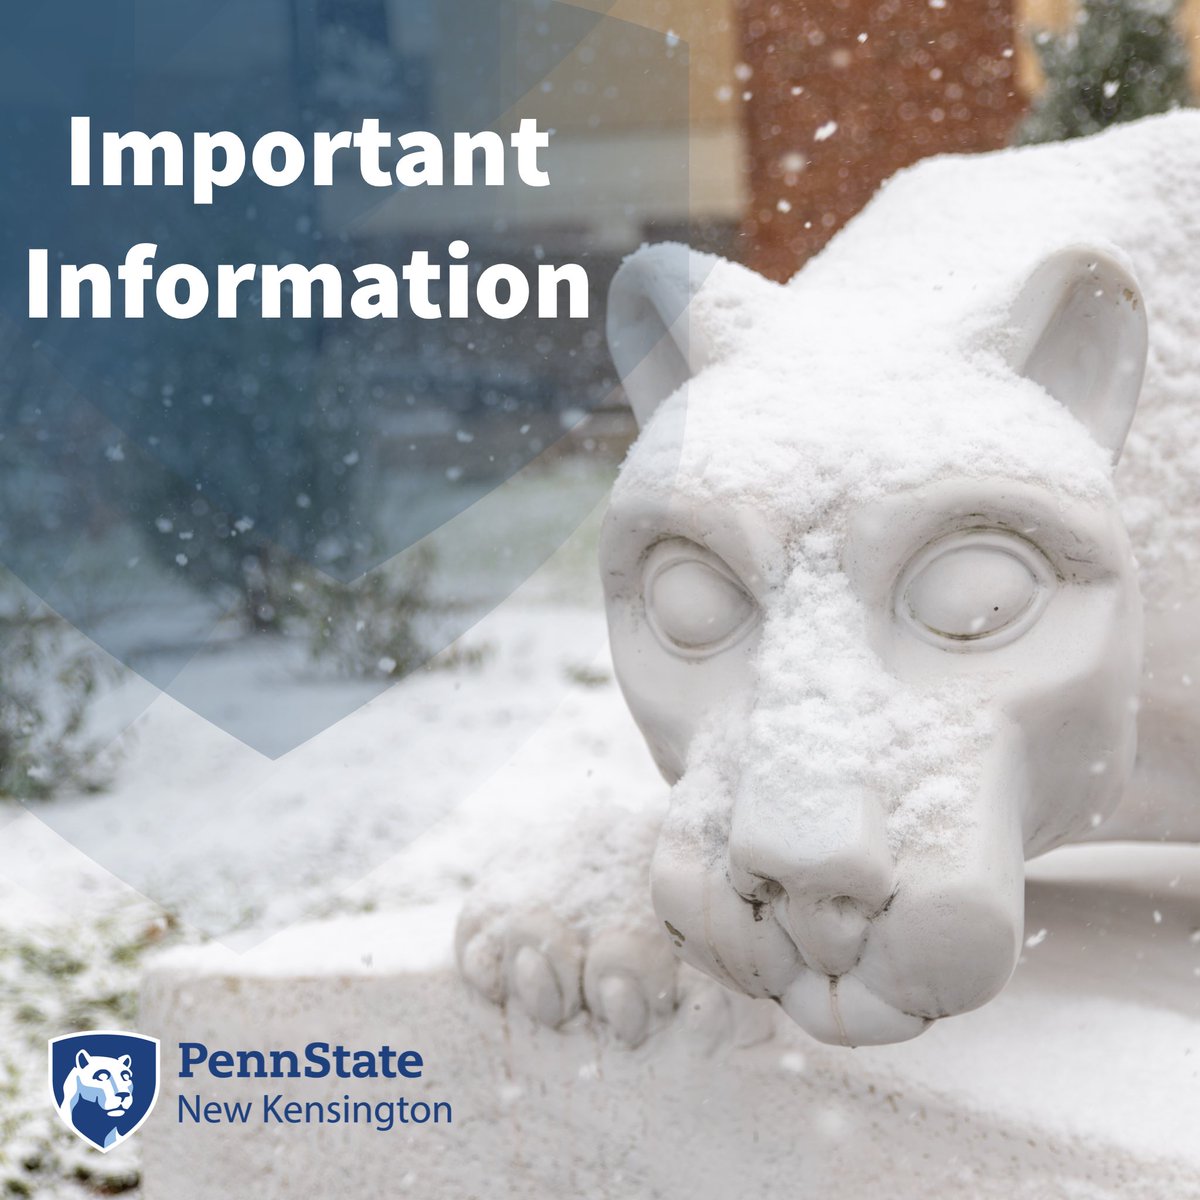 Due to impending weather, the New Kensington campus will be operating on a two-hour delay Friday, 1/19/24. Essential employees are to report. Visit newkensington.psu.edu/delay-closing-… for delay schedules and info.